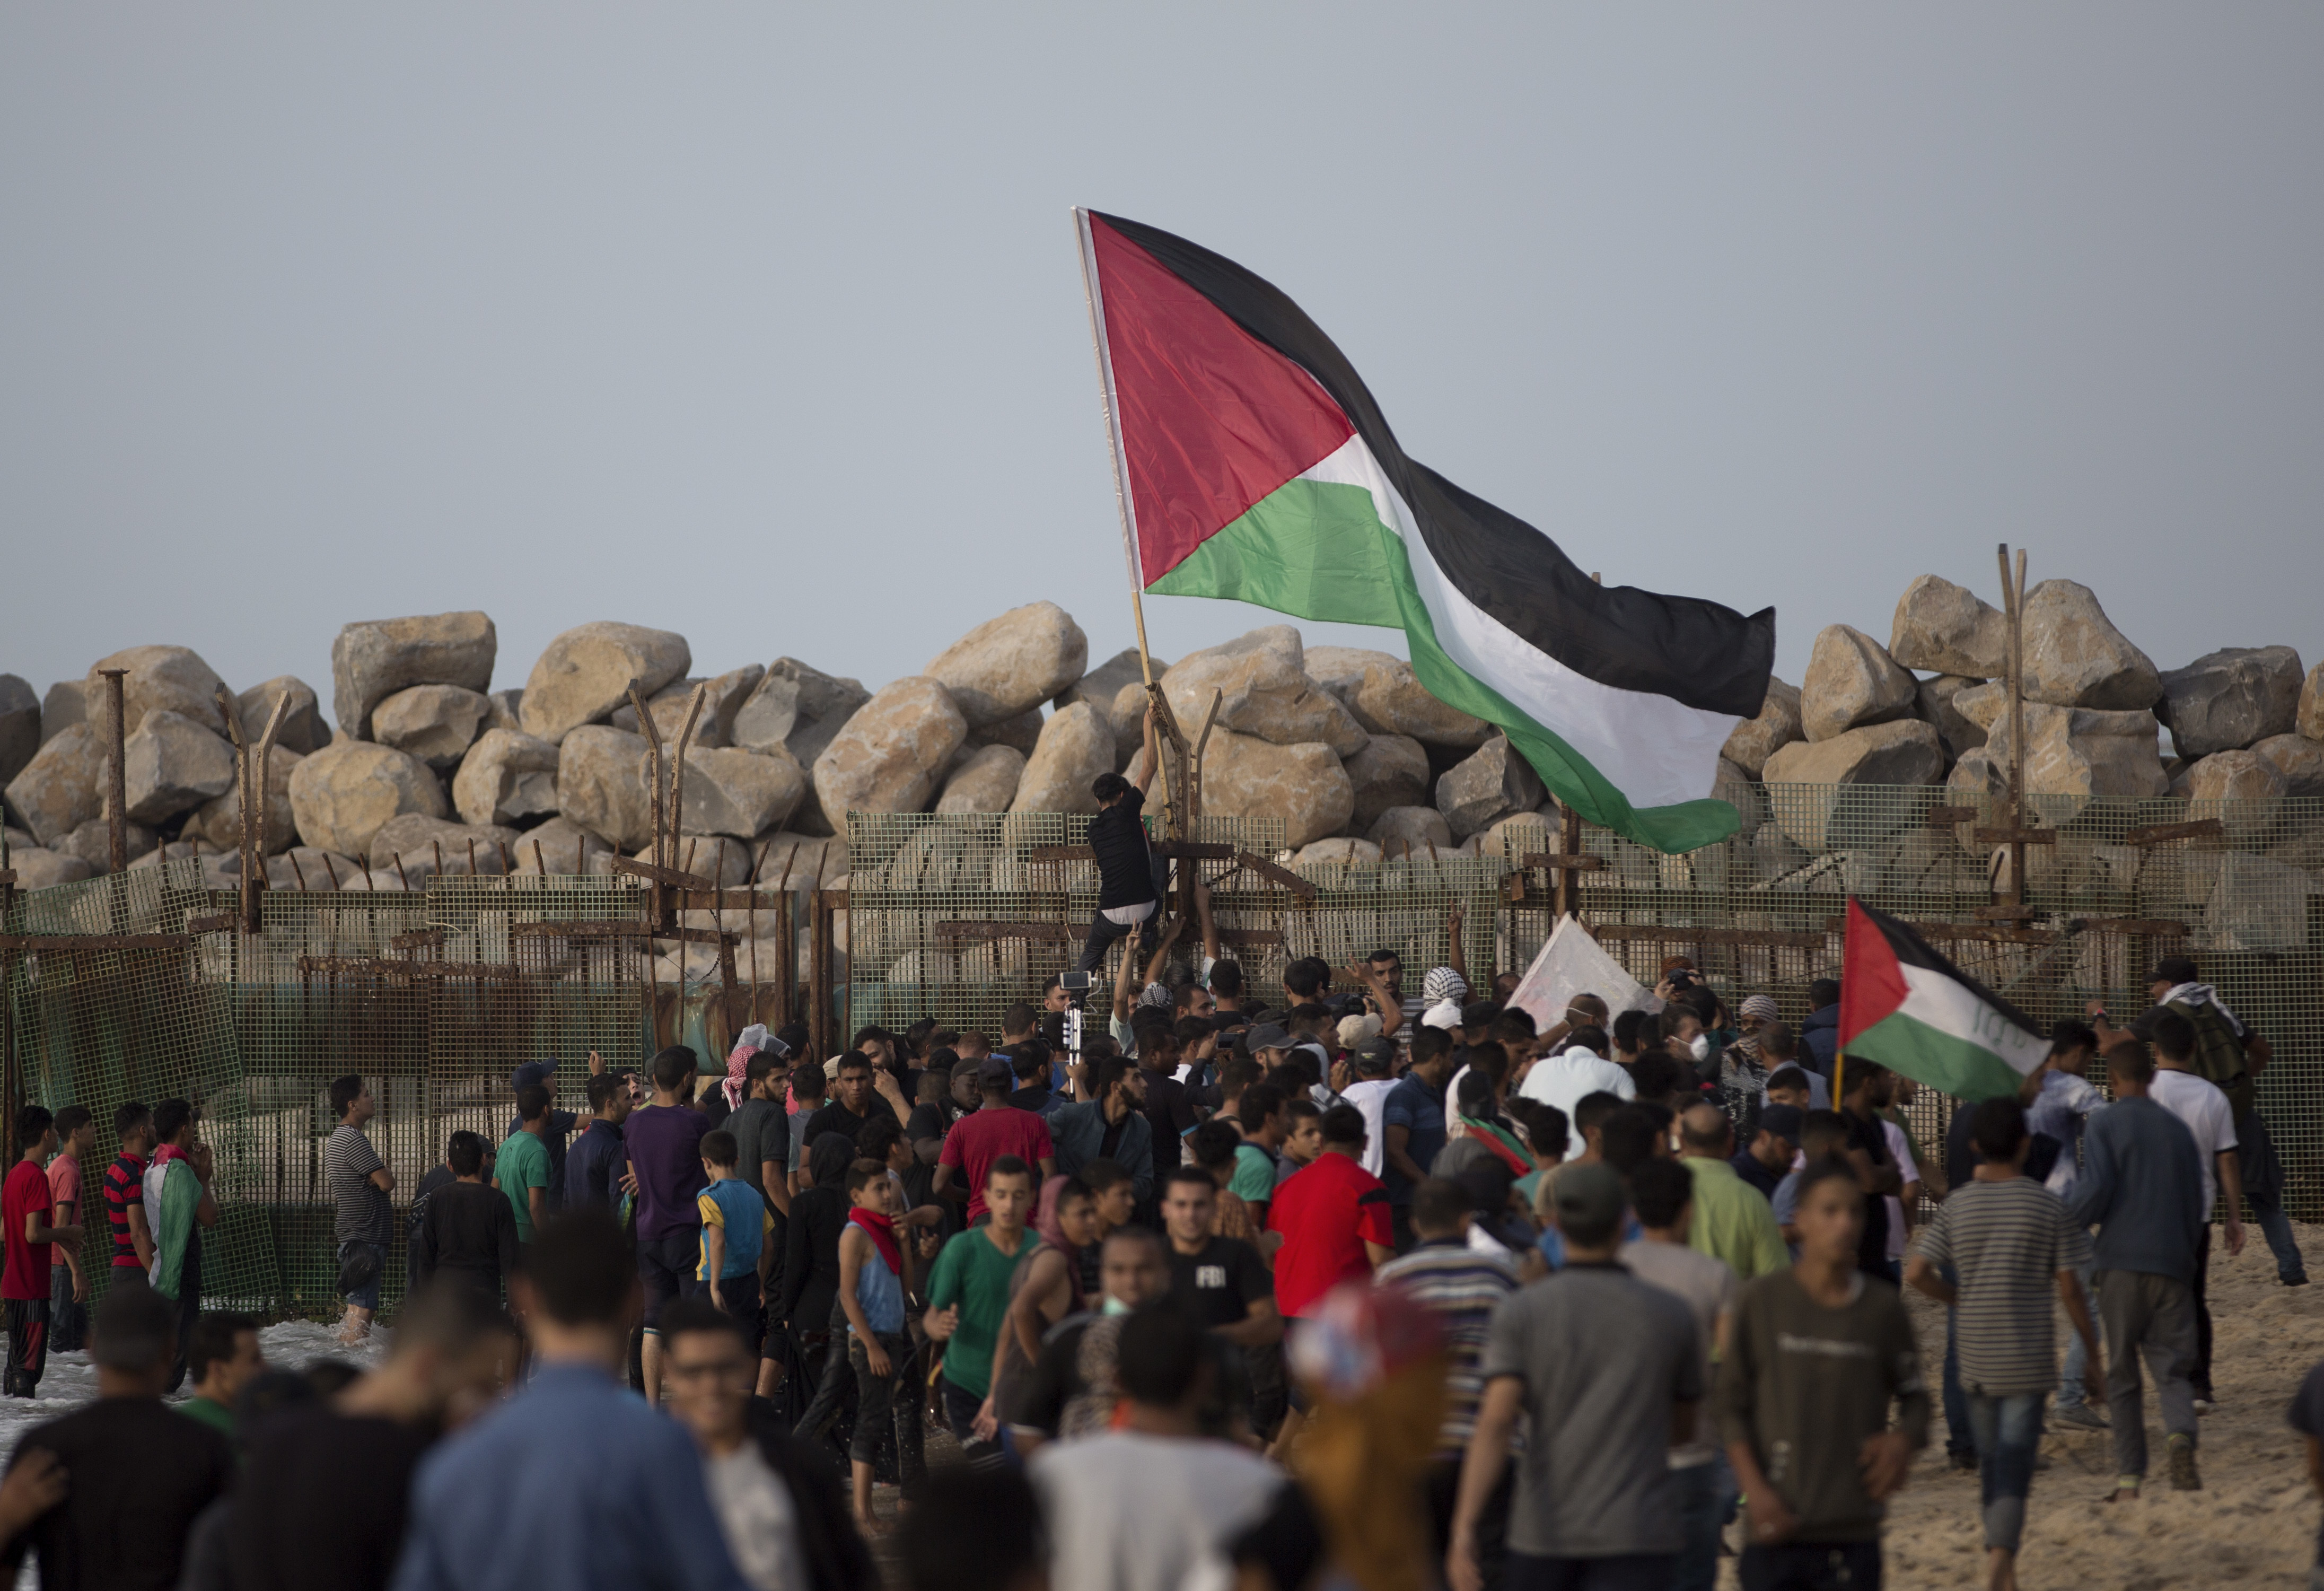 Palestinian protesters hang a national flag at the border fence